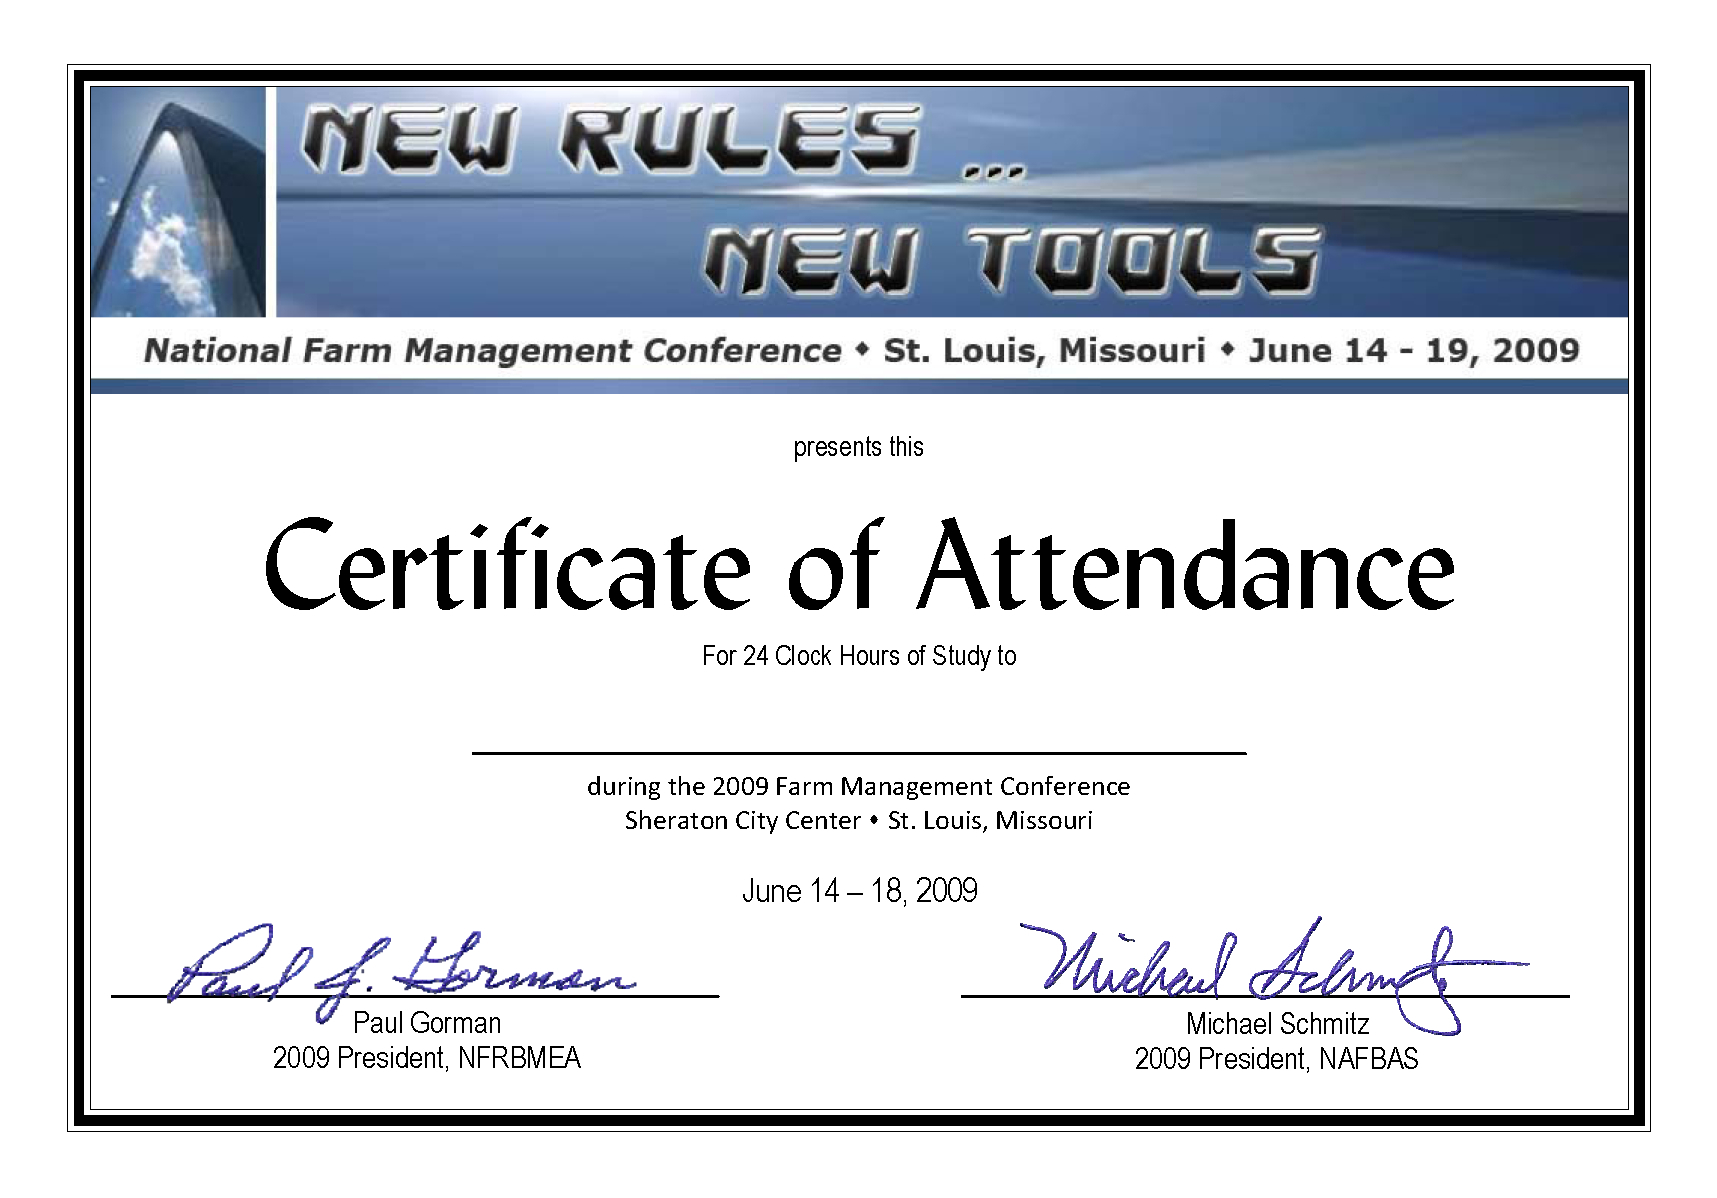 Conference Certificate Of Attendance Template – Great Within Conference Certificate Of Attendance Template